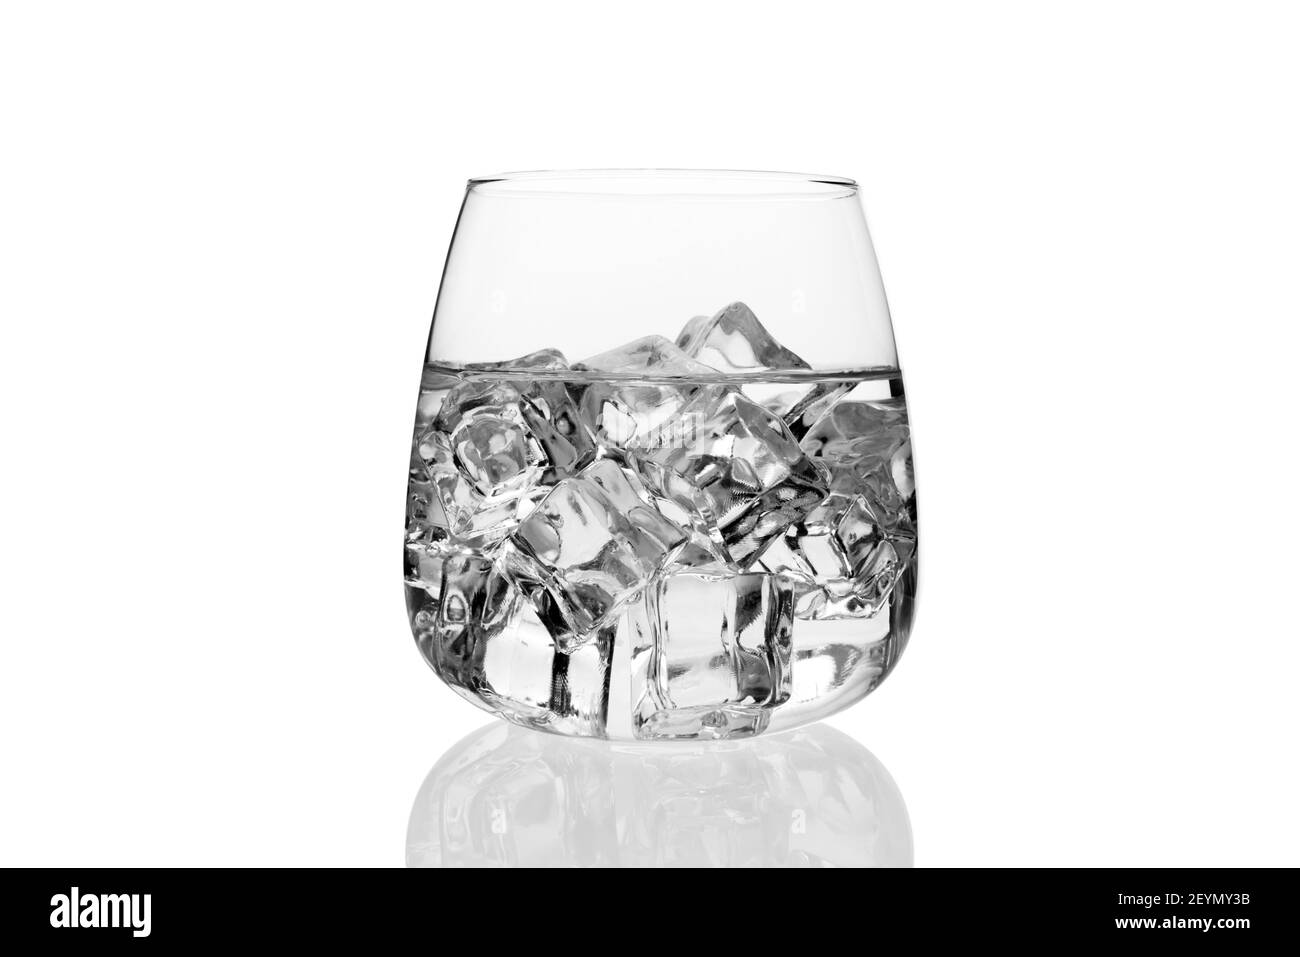 https://c8.alamy.com/comp/2EYMY3B/glass-of-water-with-ice-cubes-reflected-and-isolated-on-white-background-2EYMY3B.jpg